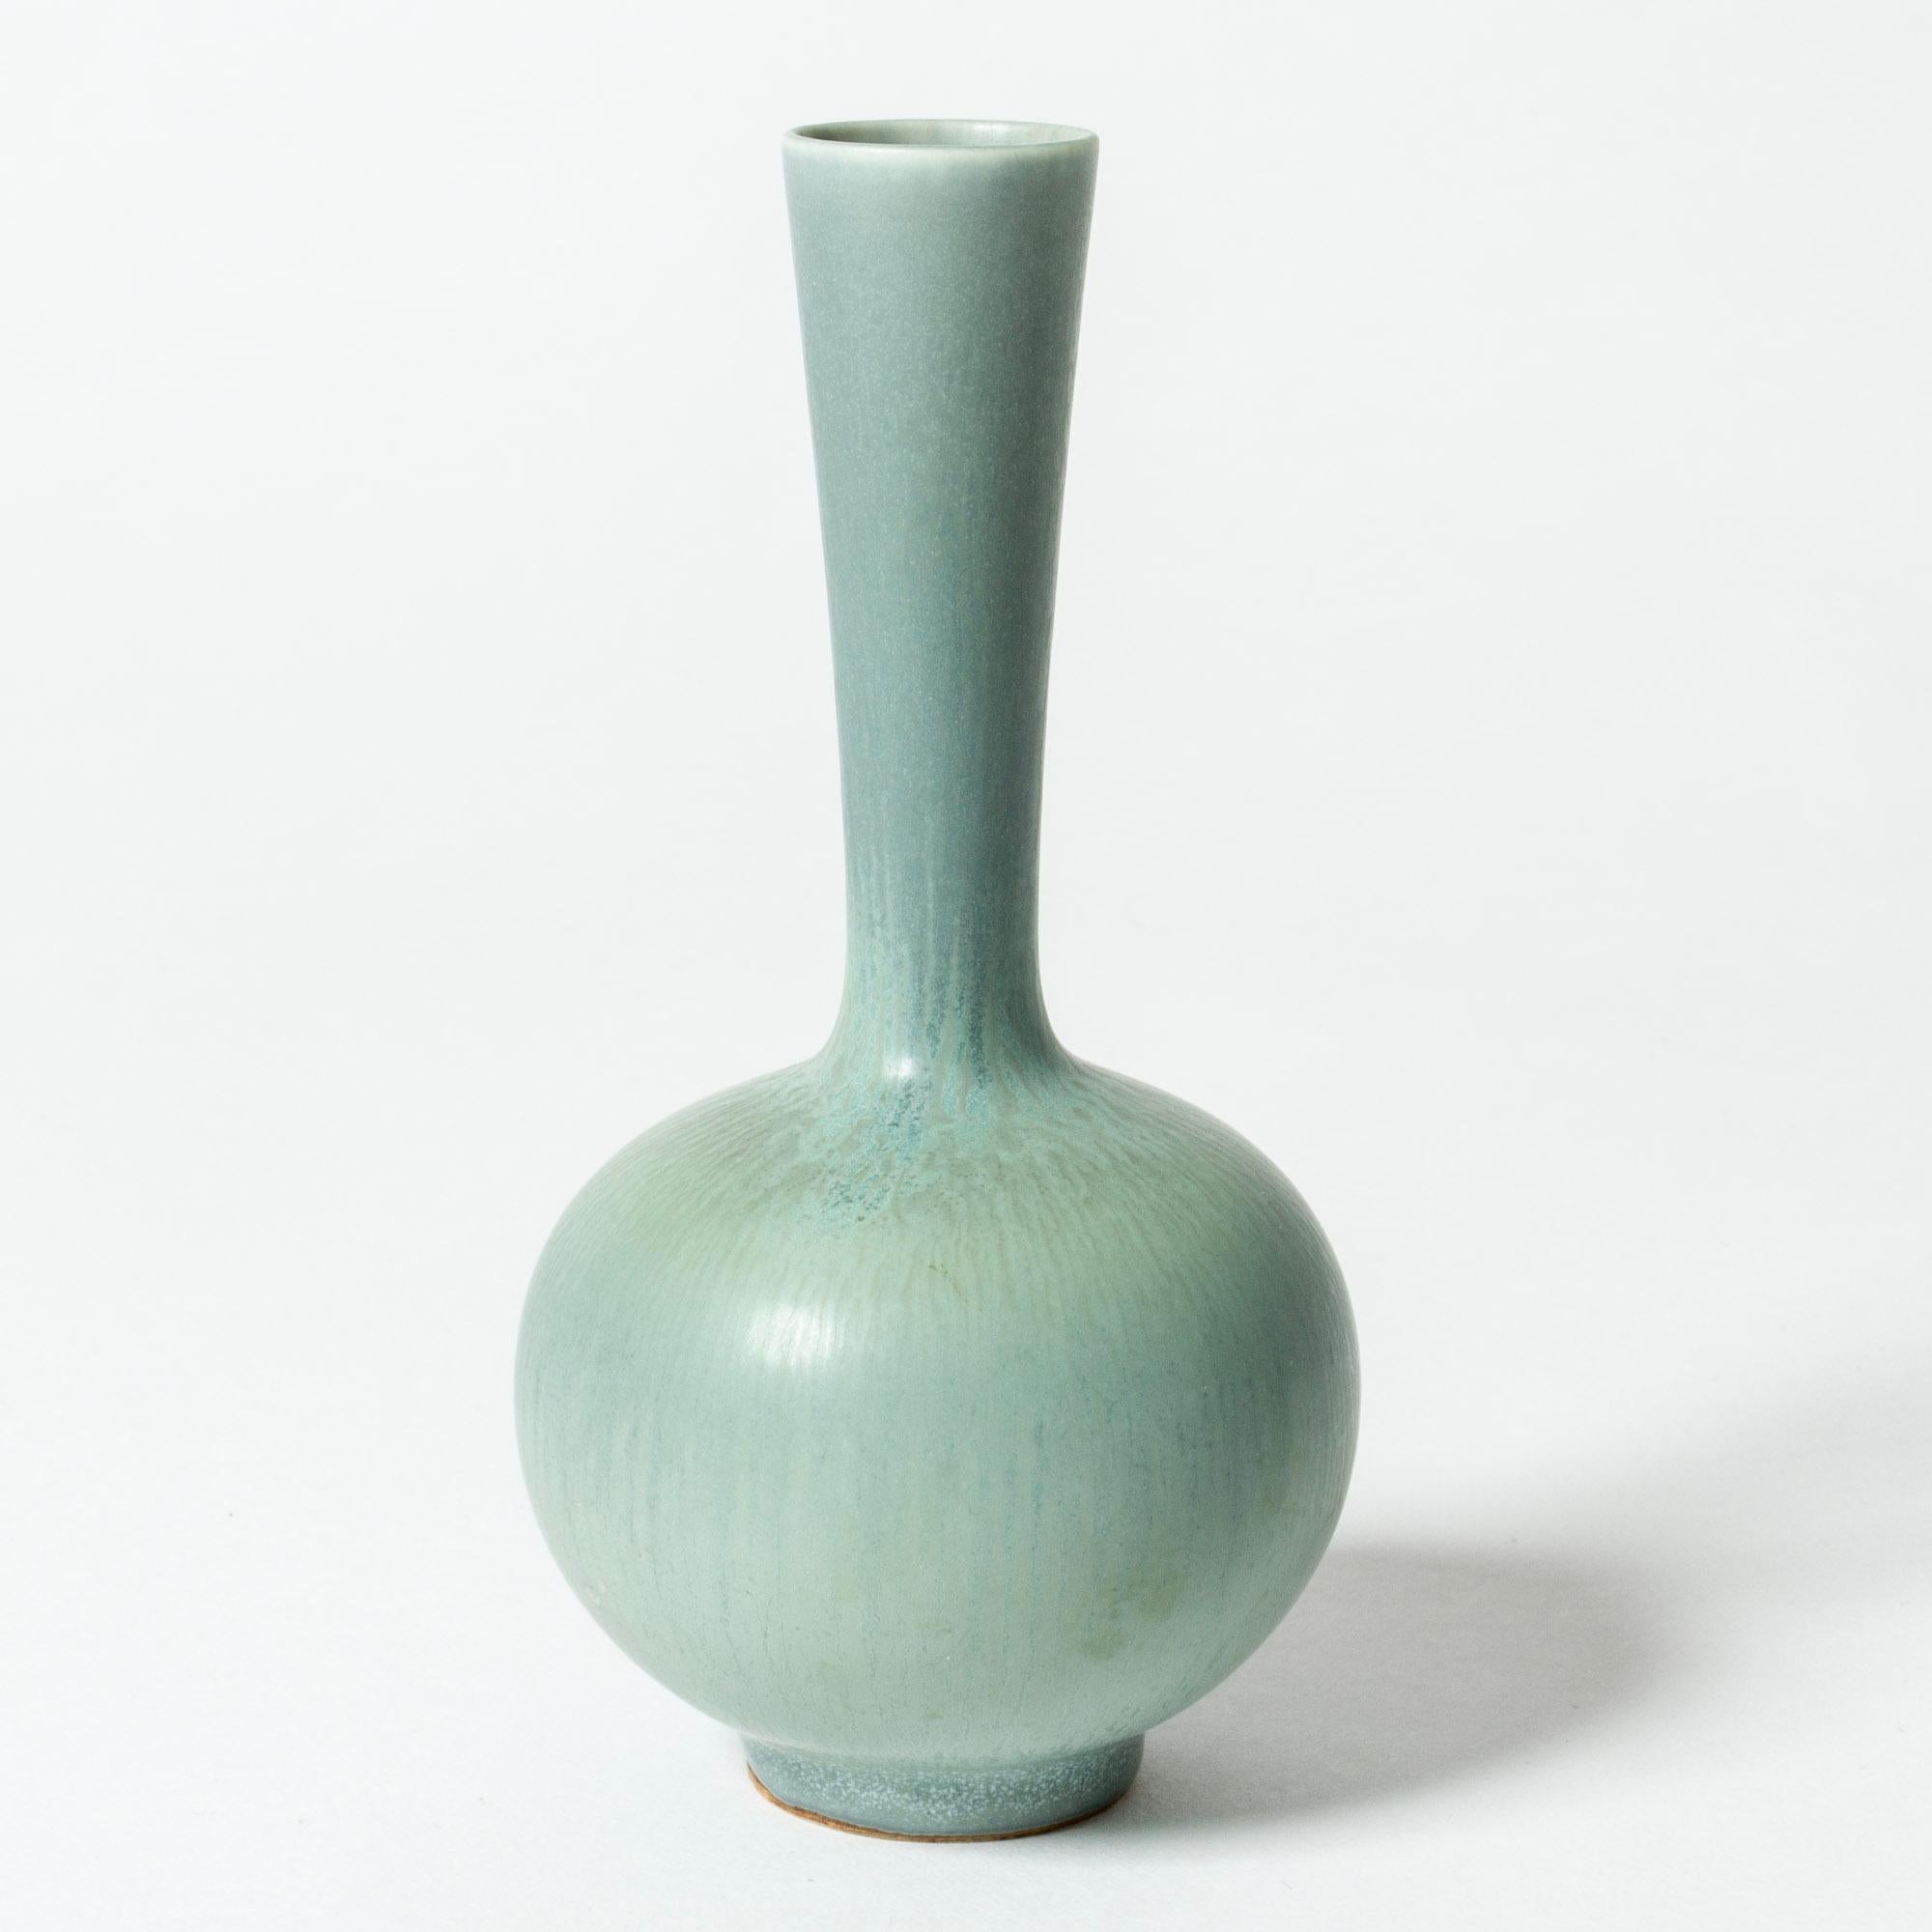 Stoneware vase by Berndt Friberg, in a neat onion shaped form. Beautiful ocean blueish hare’s fur glaze.

Berndt Friberg was a Swedish ceramicist, renowned for his stoneware vases and vessels for Gustavsberg. His pure, composed designs with